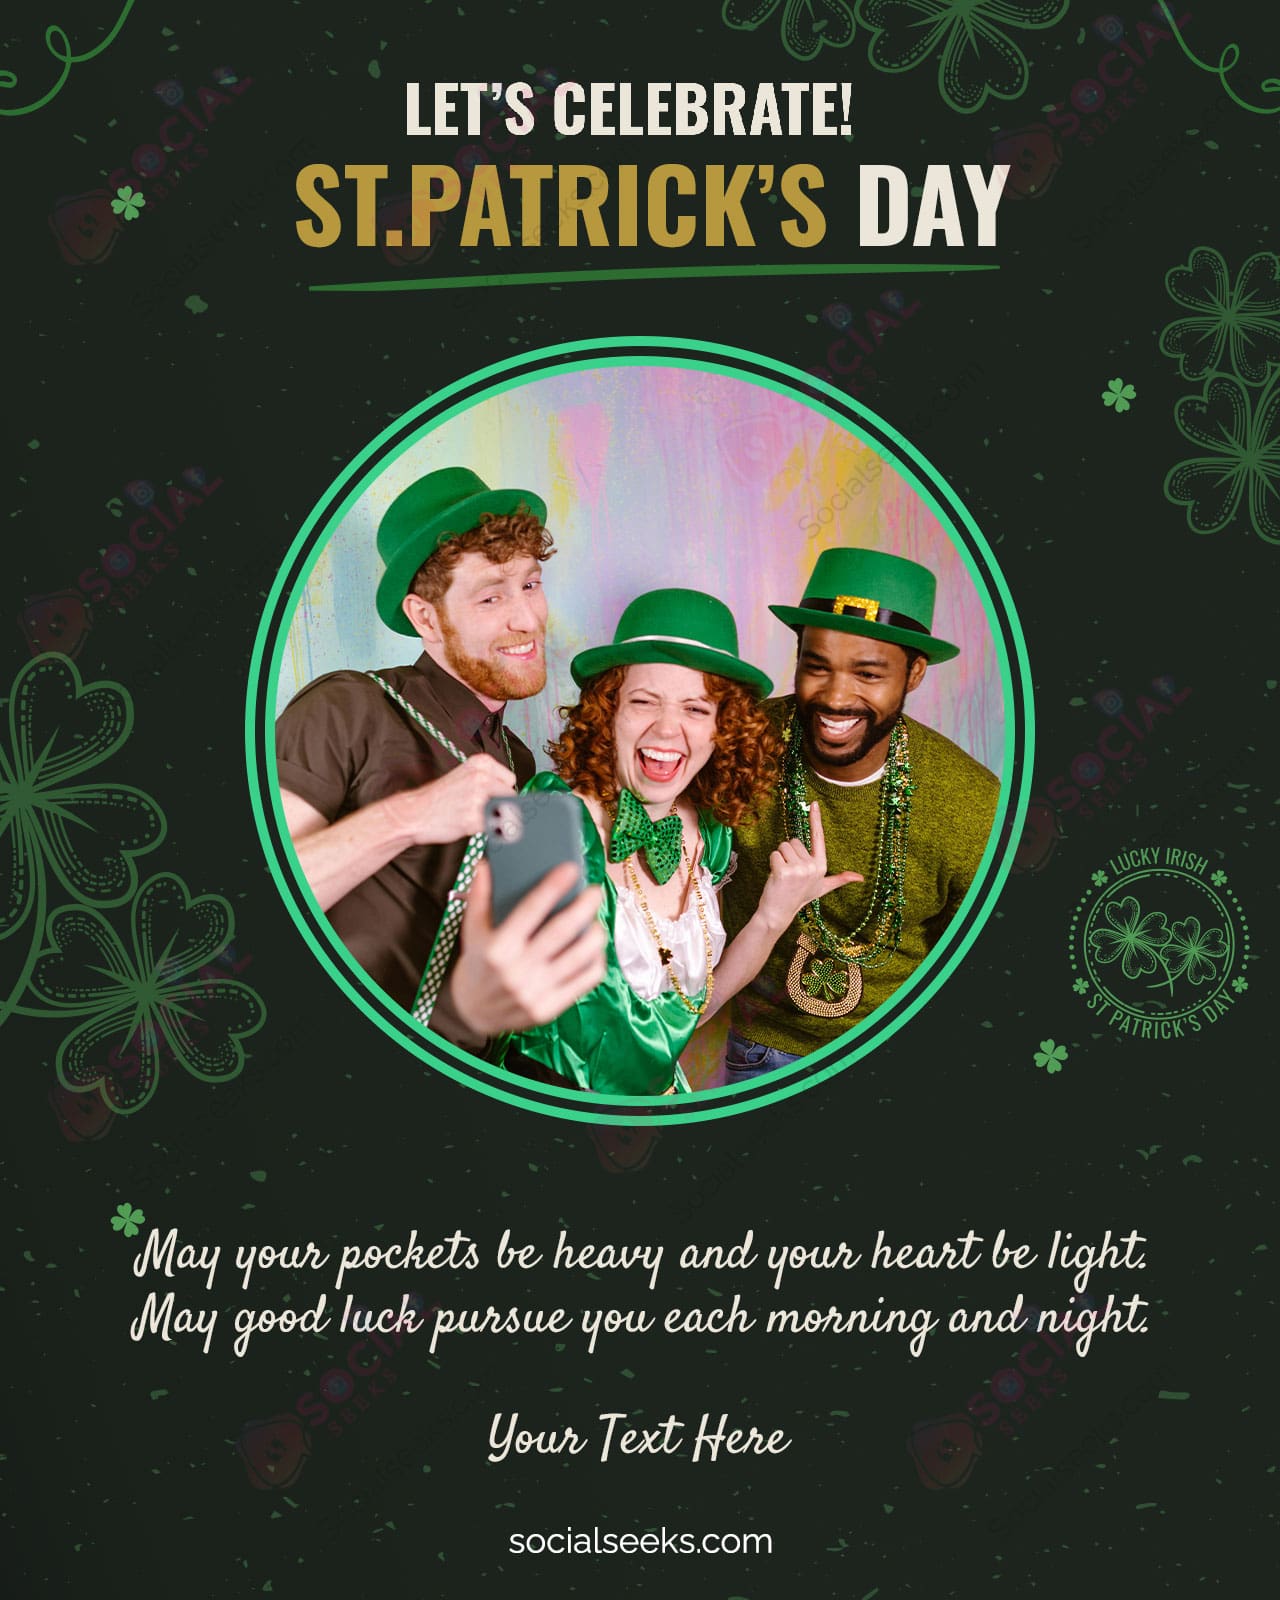 St Patrick's Day | Personalized Greeting Cards Ireland